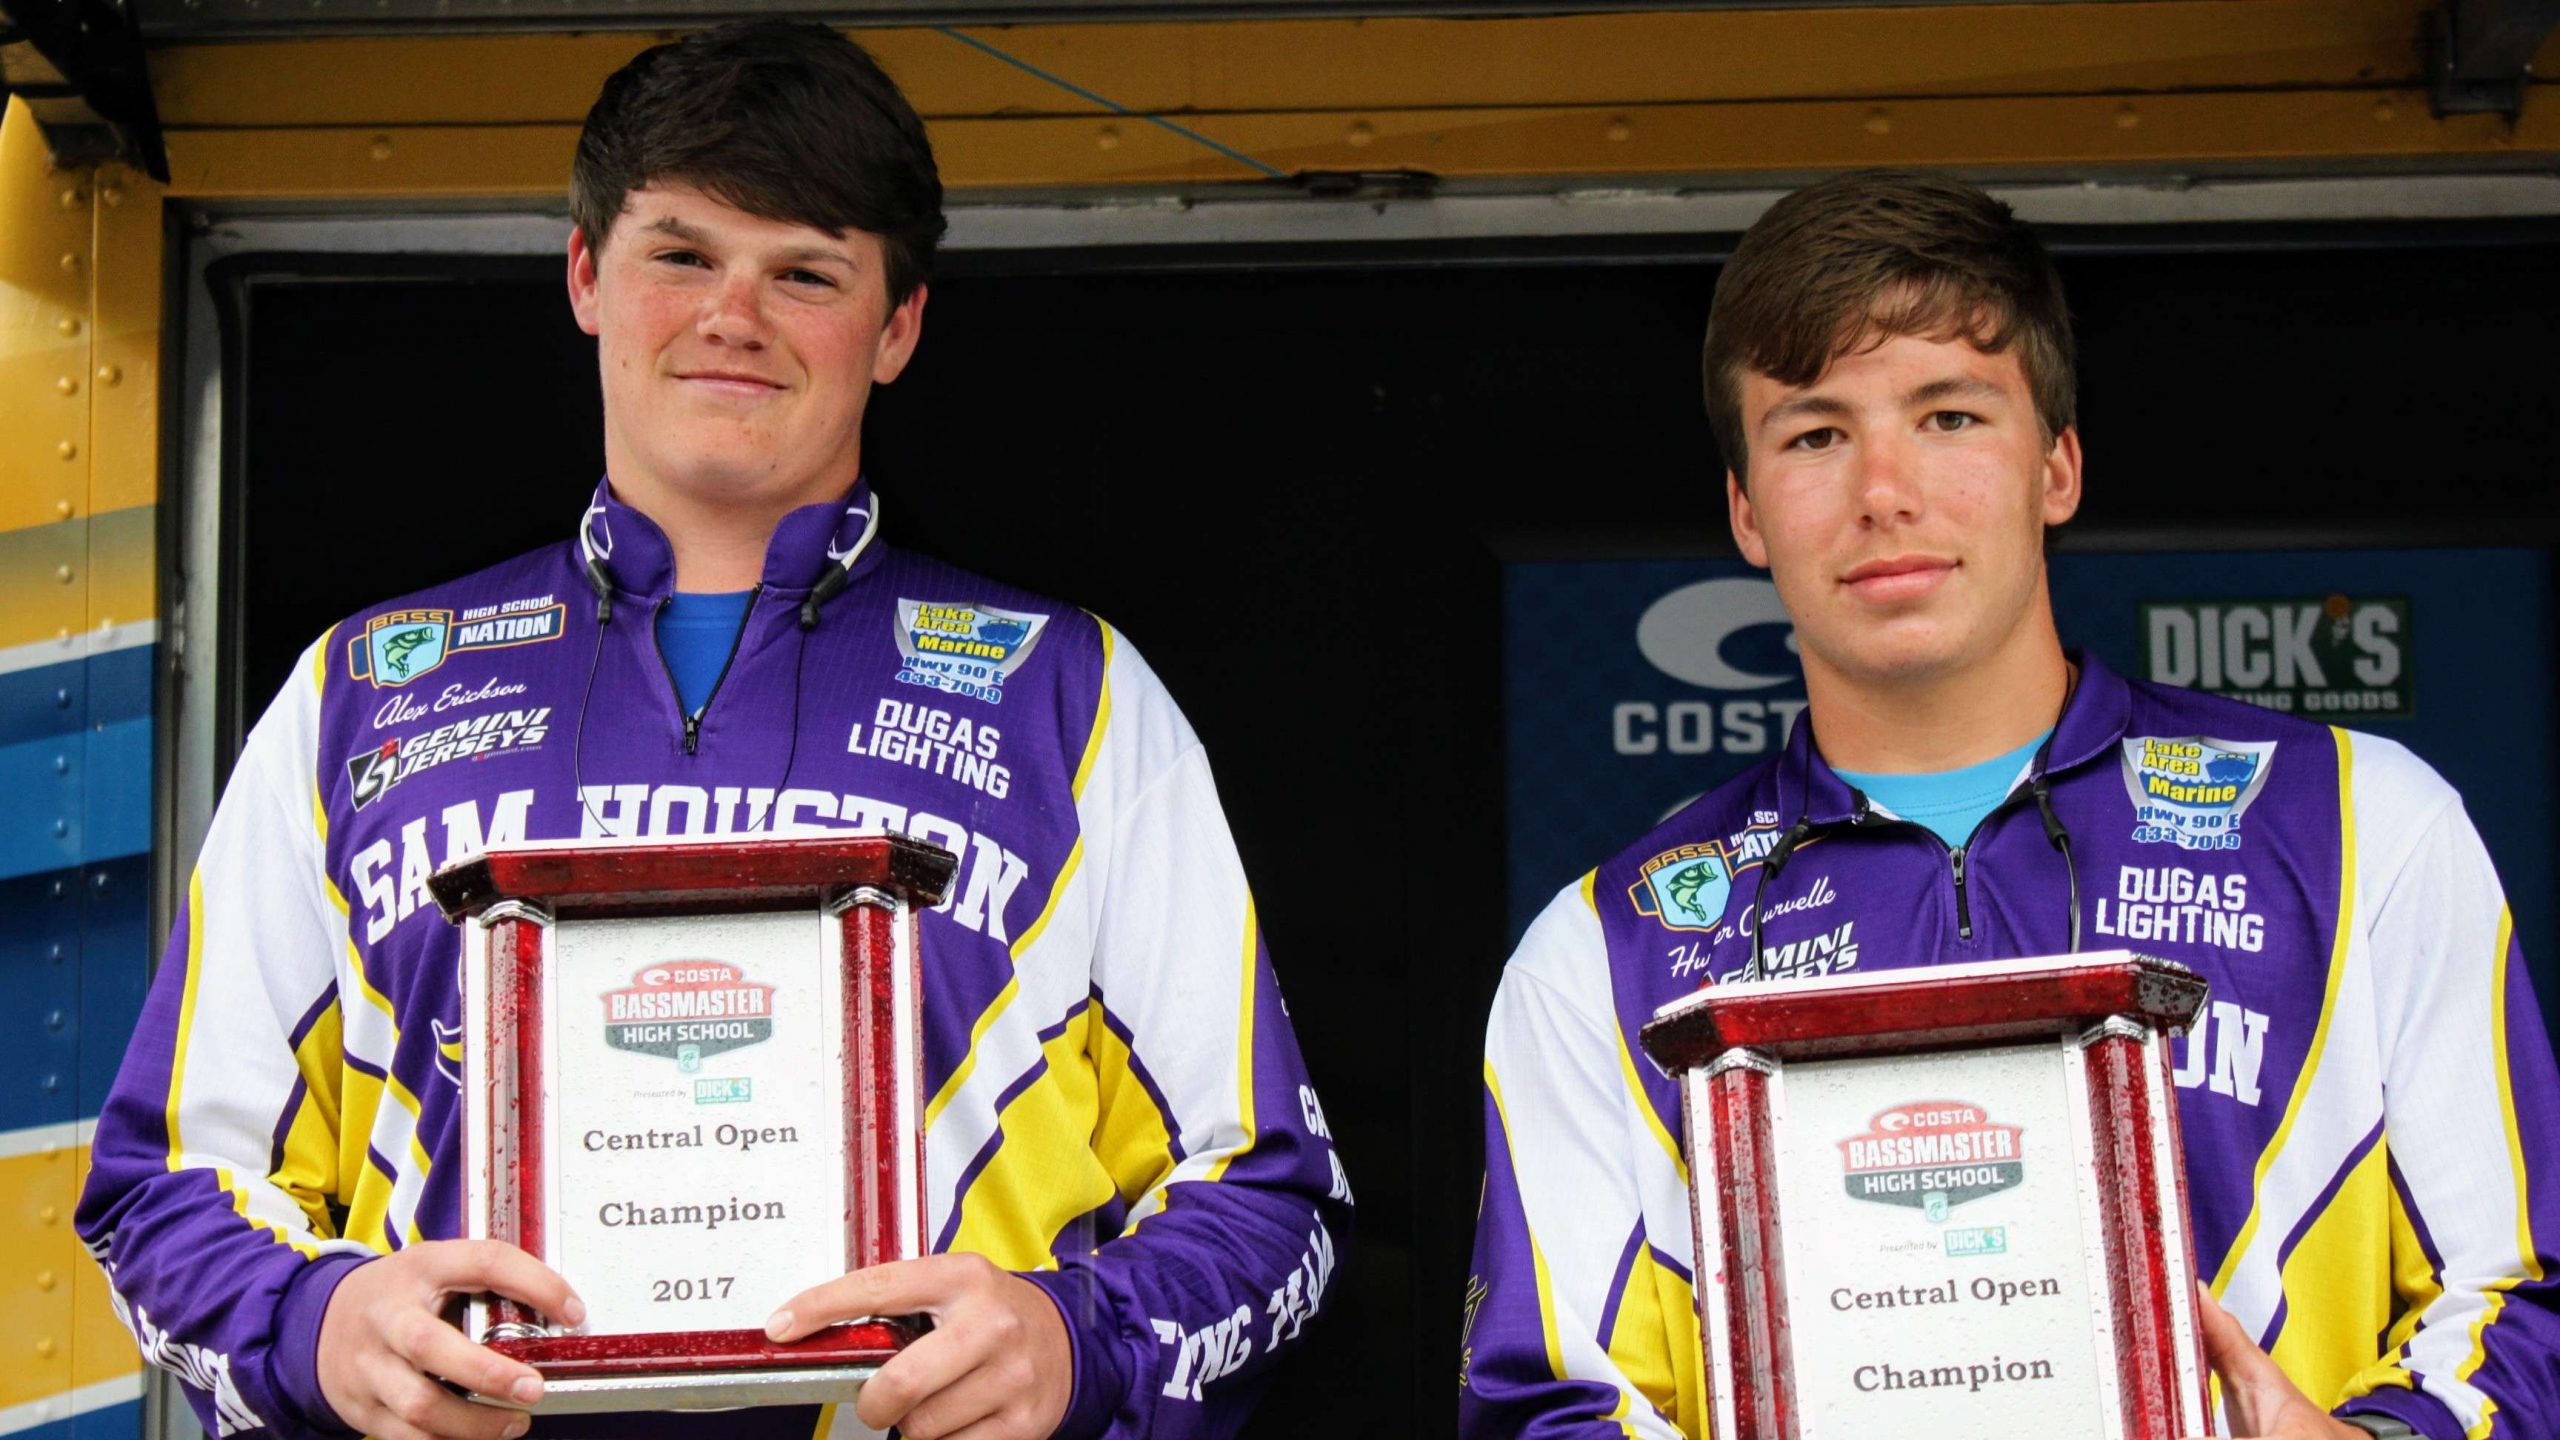 And there they are -- Sam Houston High School's Alex Erickson and
  Hunter Courvelle, the Costa Bassmaster High School Central Open
  champions. They'll be going ot the Bassmaster High School Classic at
  the end of March, and earned a spot in the national championship
  tournament to be held in June. They also won $1,500 for the Sam
  Houston High bass fishing team.
